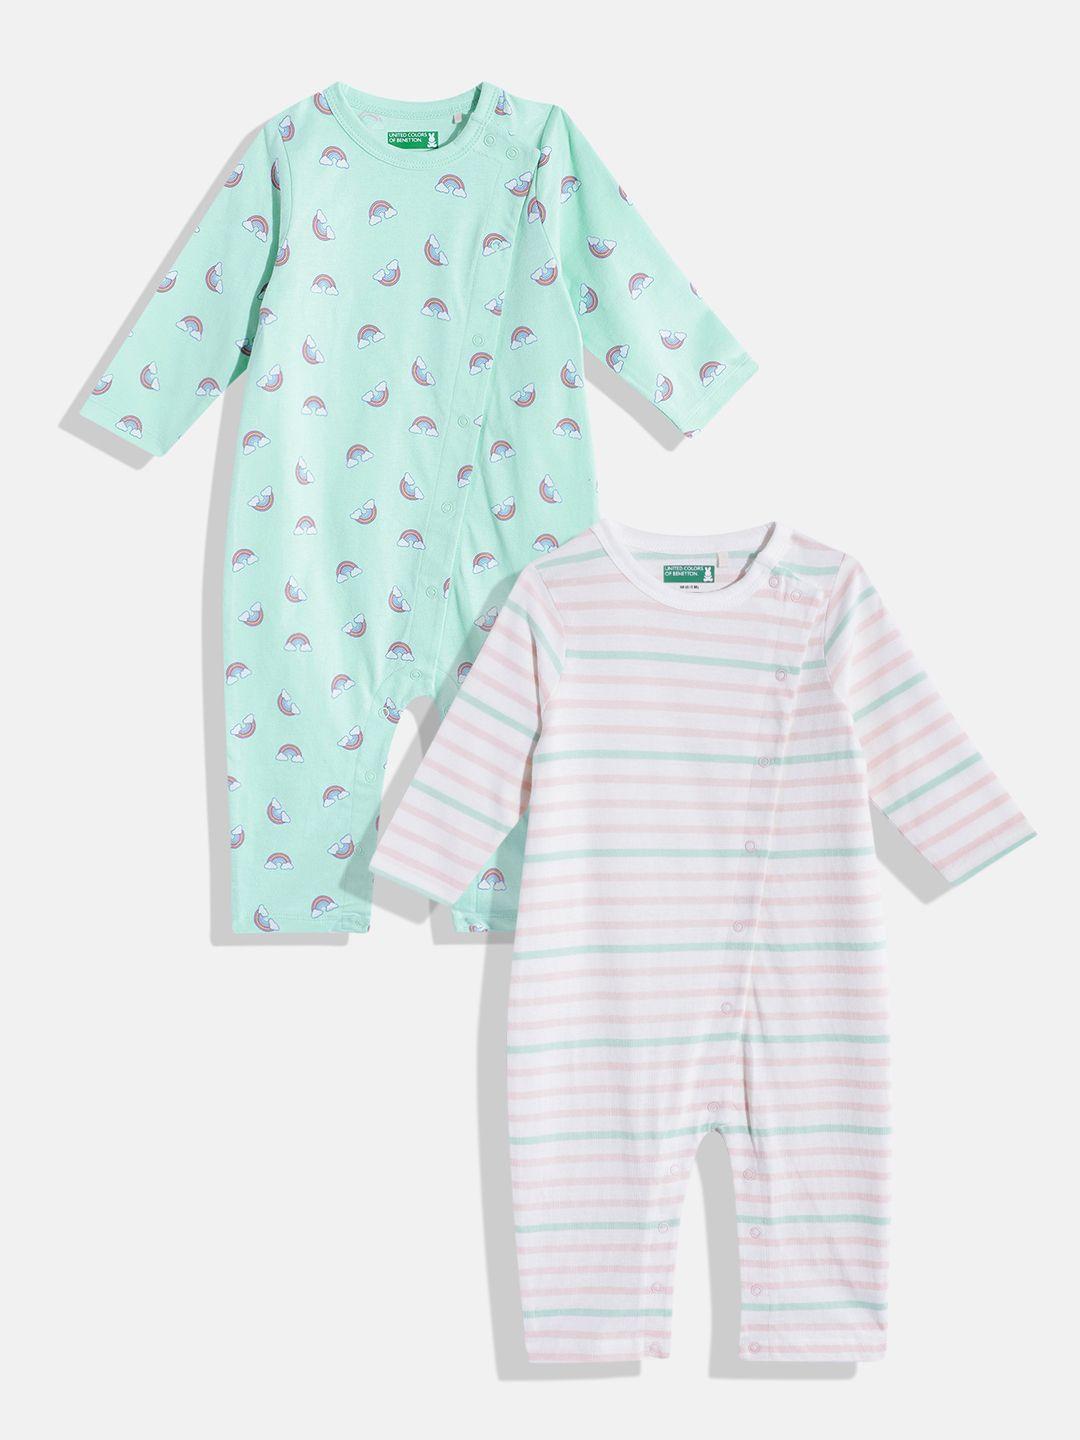 united-colors-of-benetton-infant-girls-pack-of-2-pure-cotton-rompers